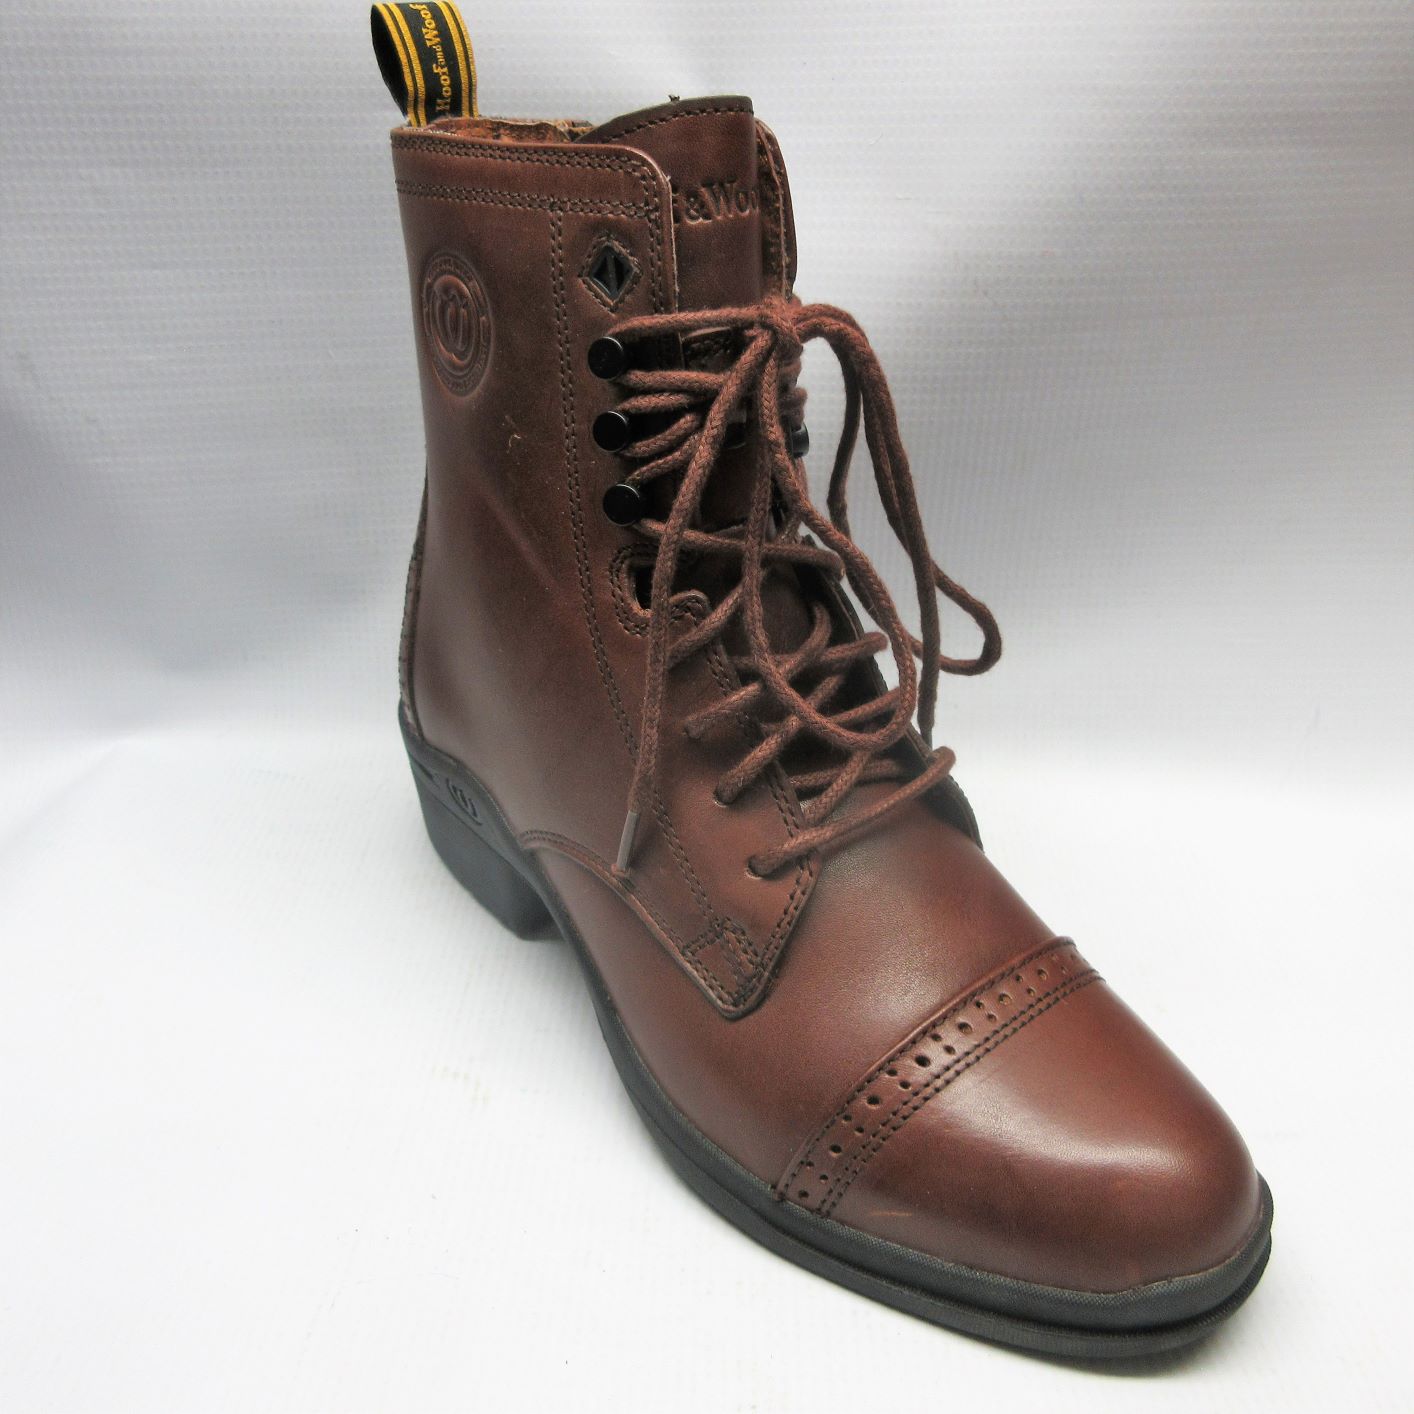 Details about   Paddock Boots NEW IN BOX Hoof And Woof Women's Black Leather Laced Riding Shoes 